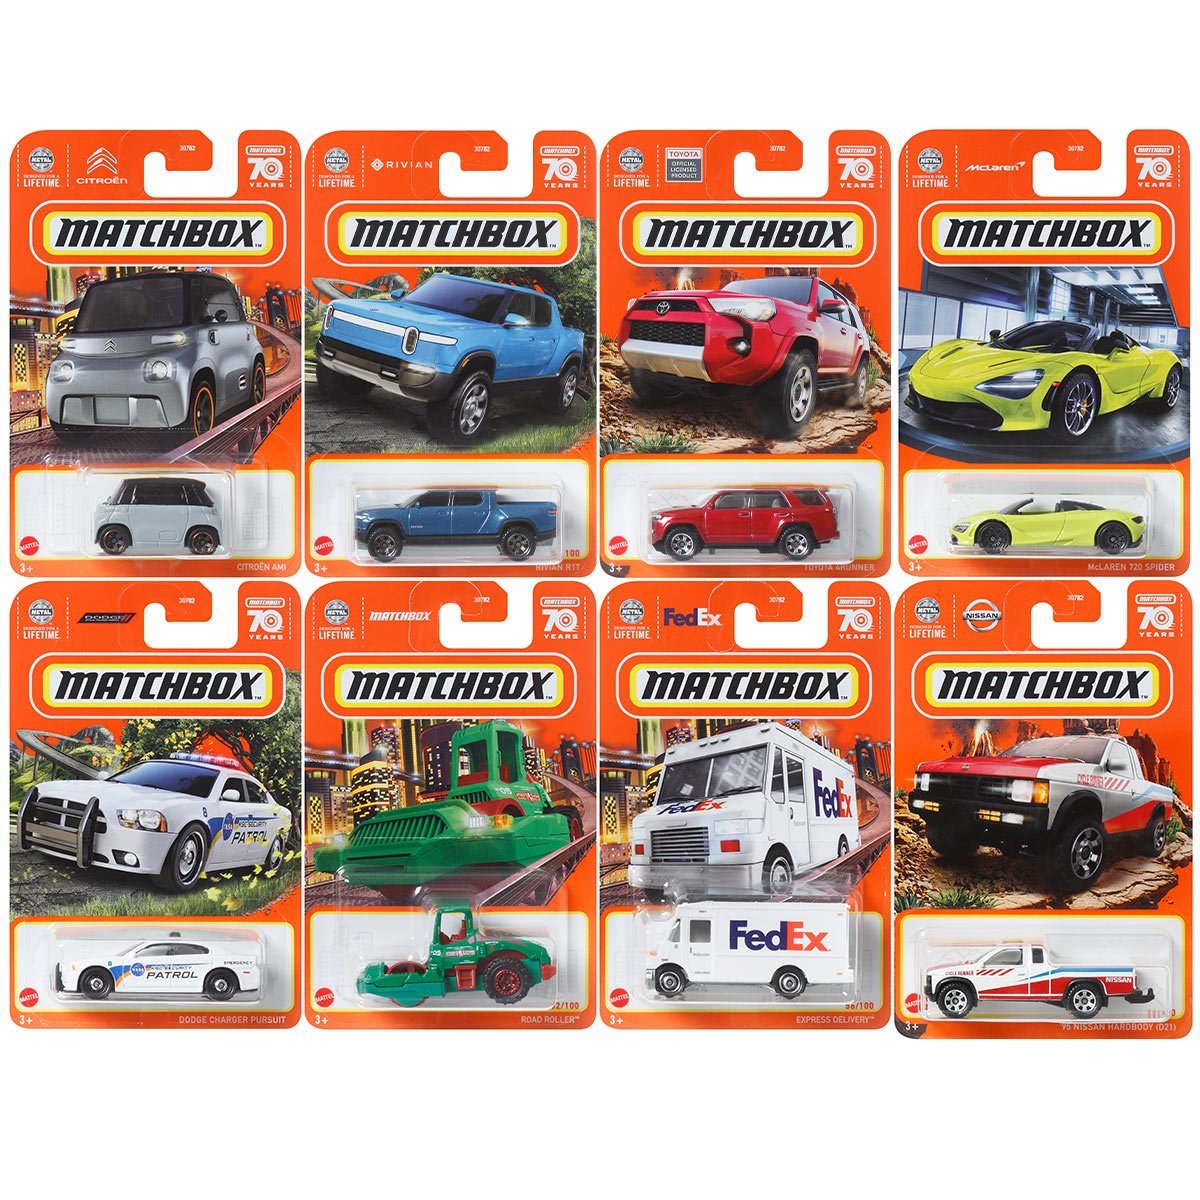 Uncover the World of Matchbox Cars A Collector's Guide to Miniature